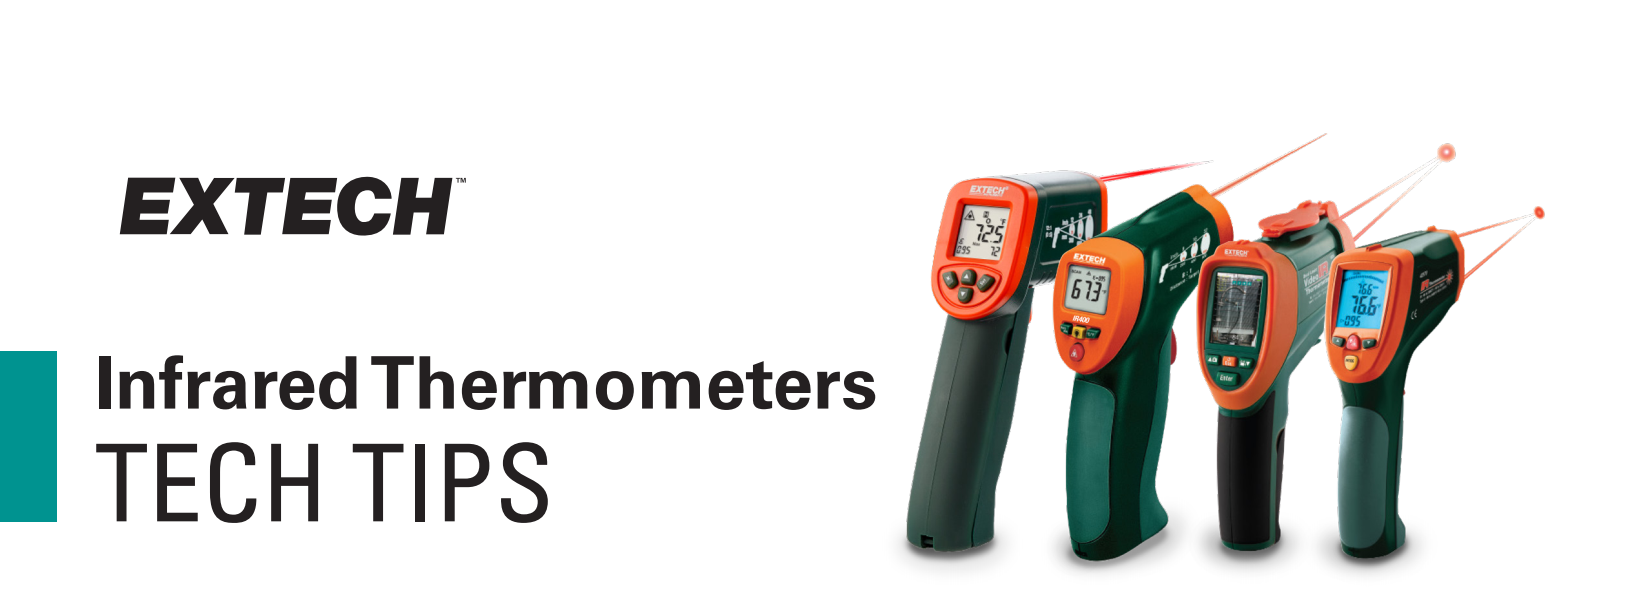 Laser Infrared Thermometers - Chocolate Man